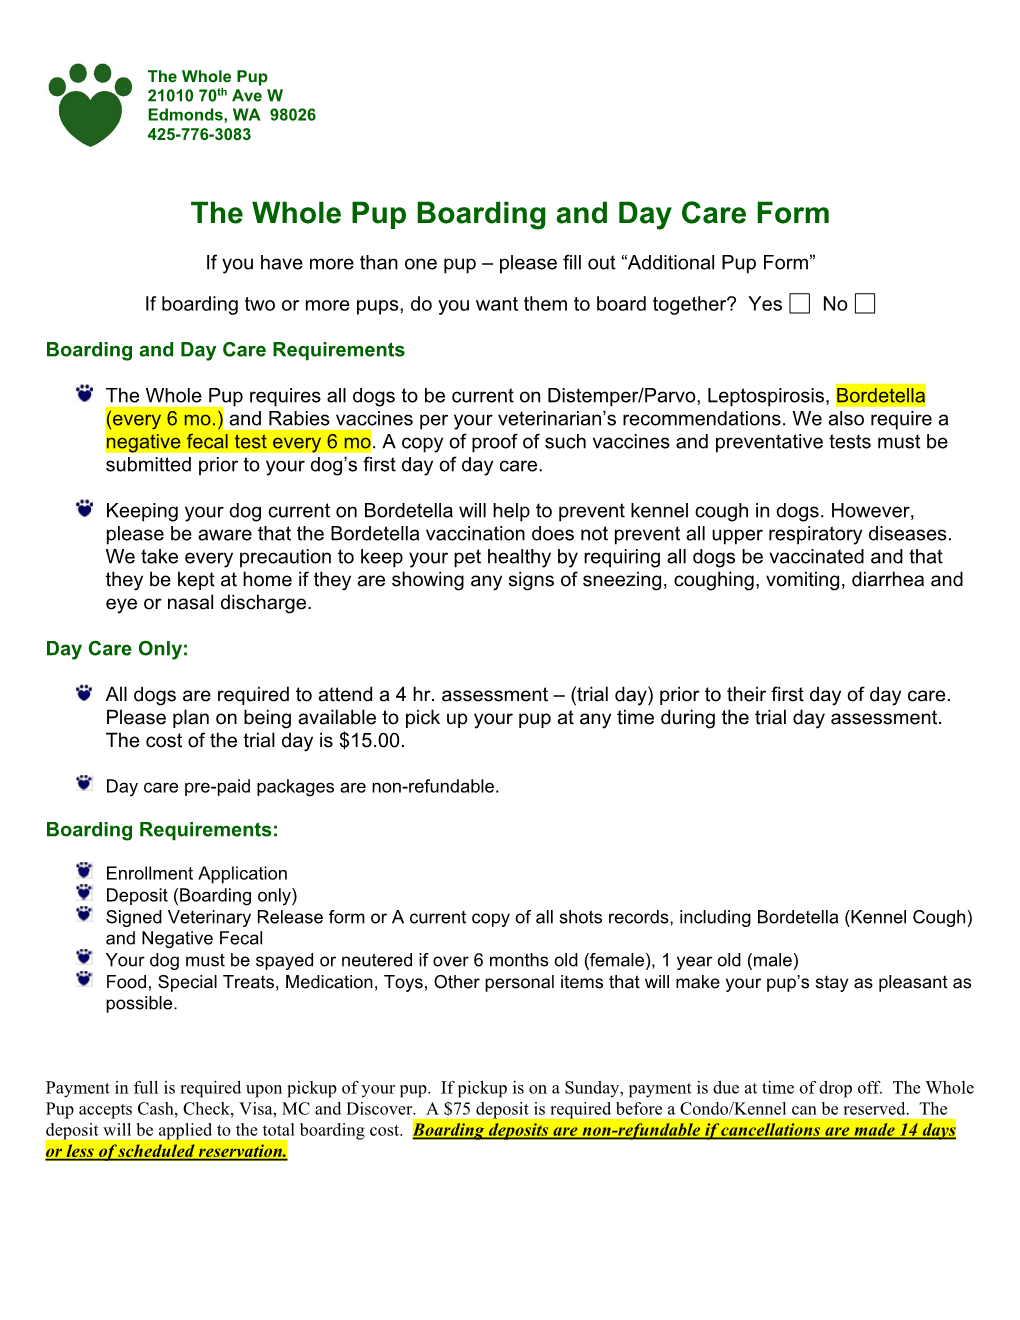 The Whole Pup Boarding and Day Care Form